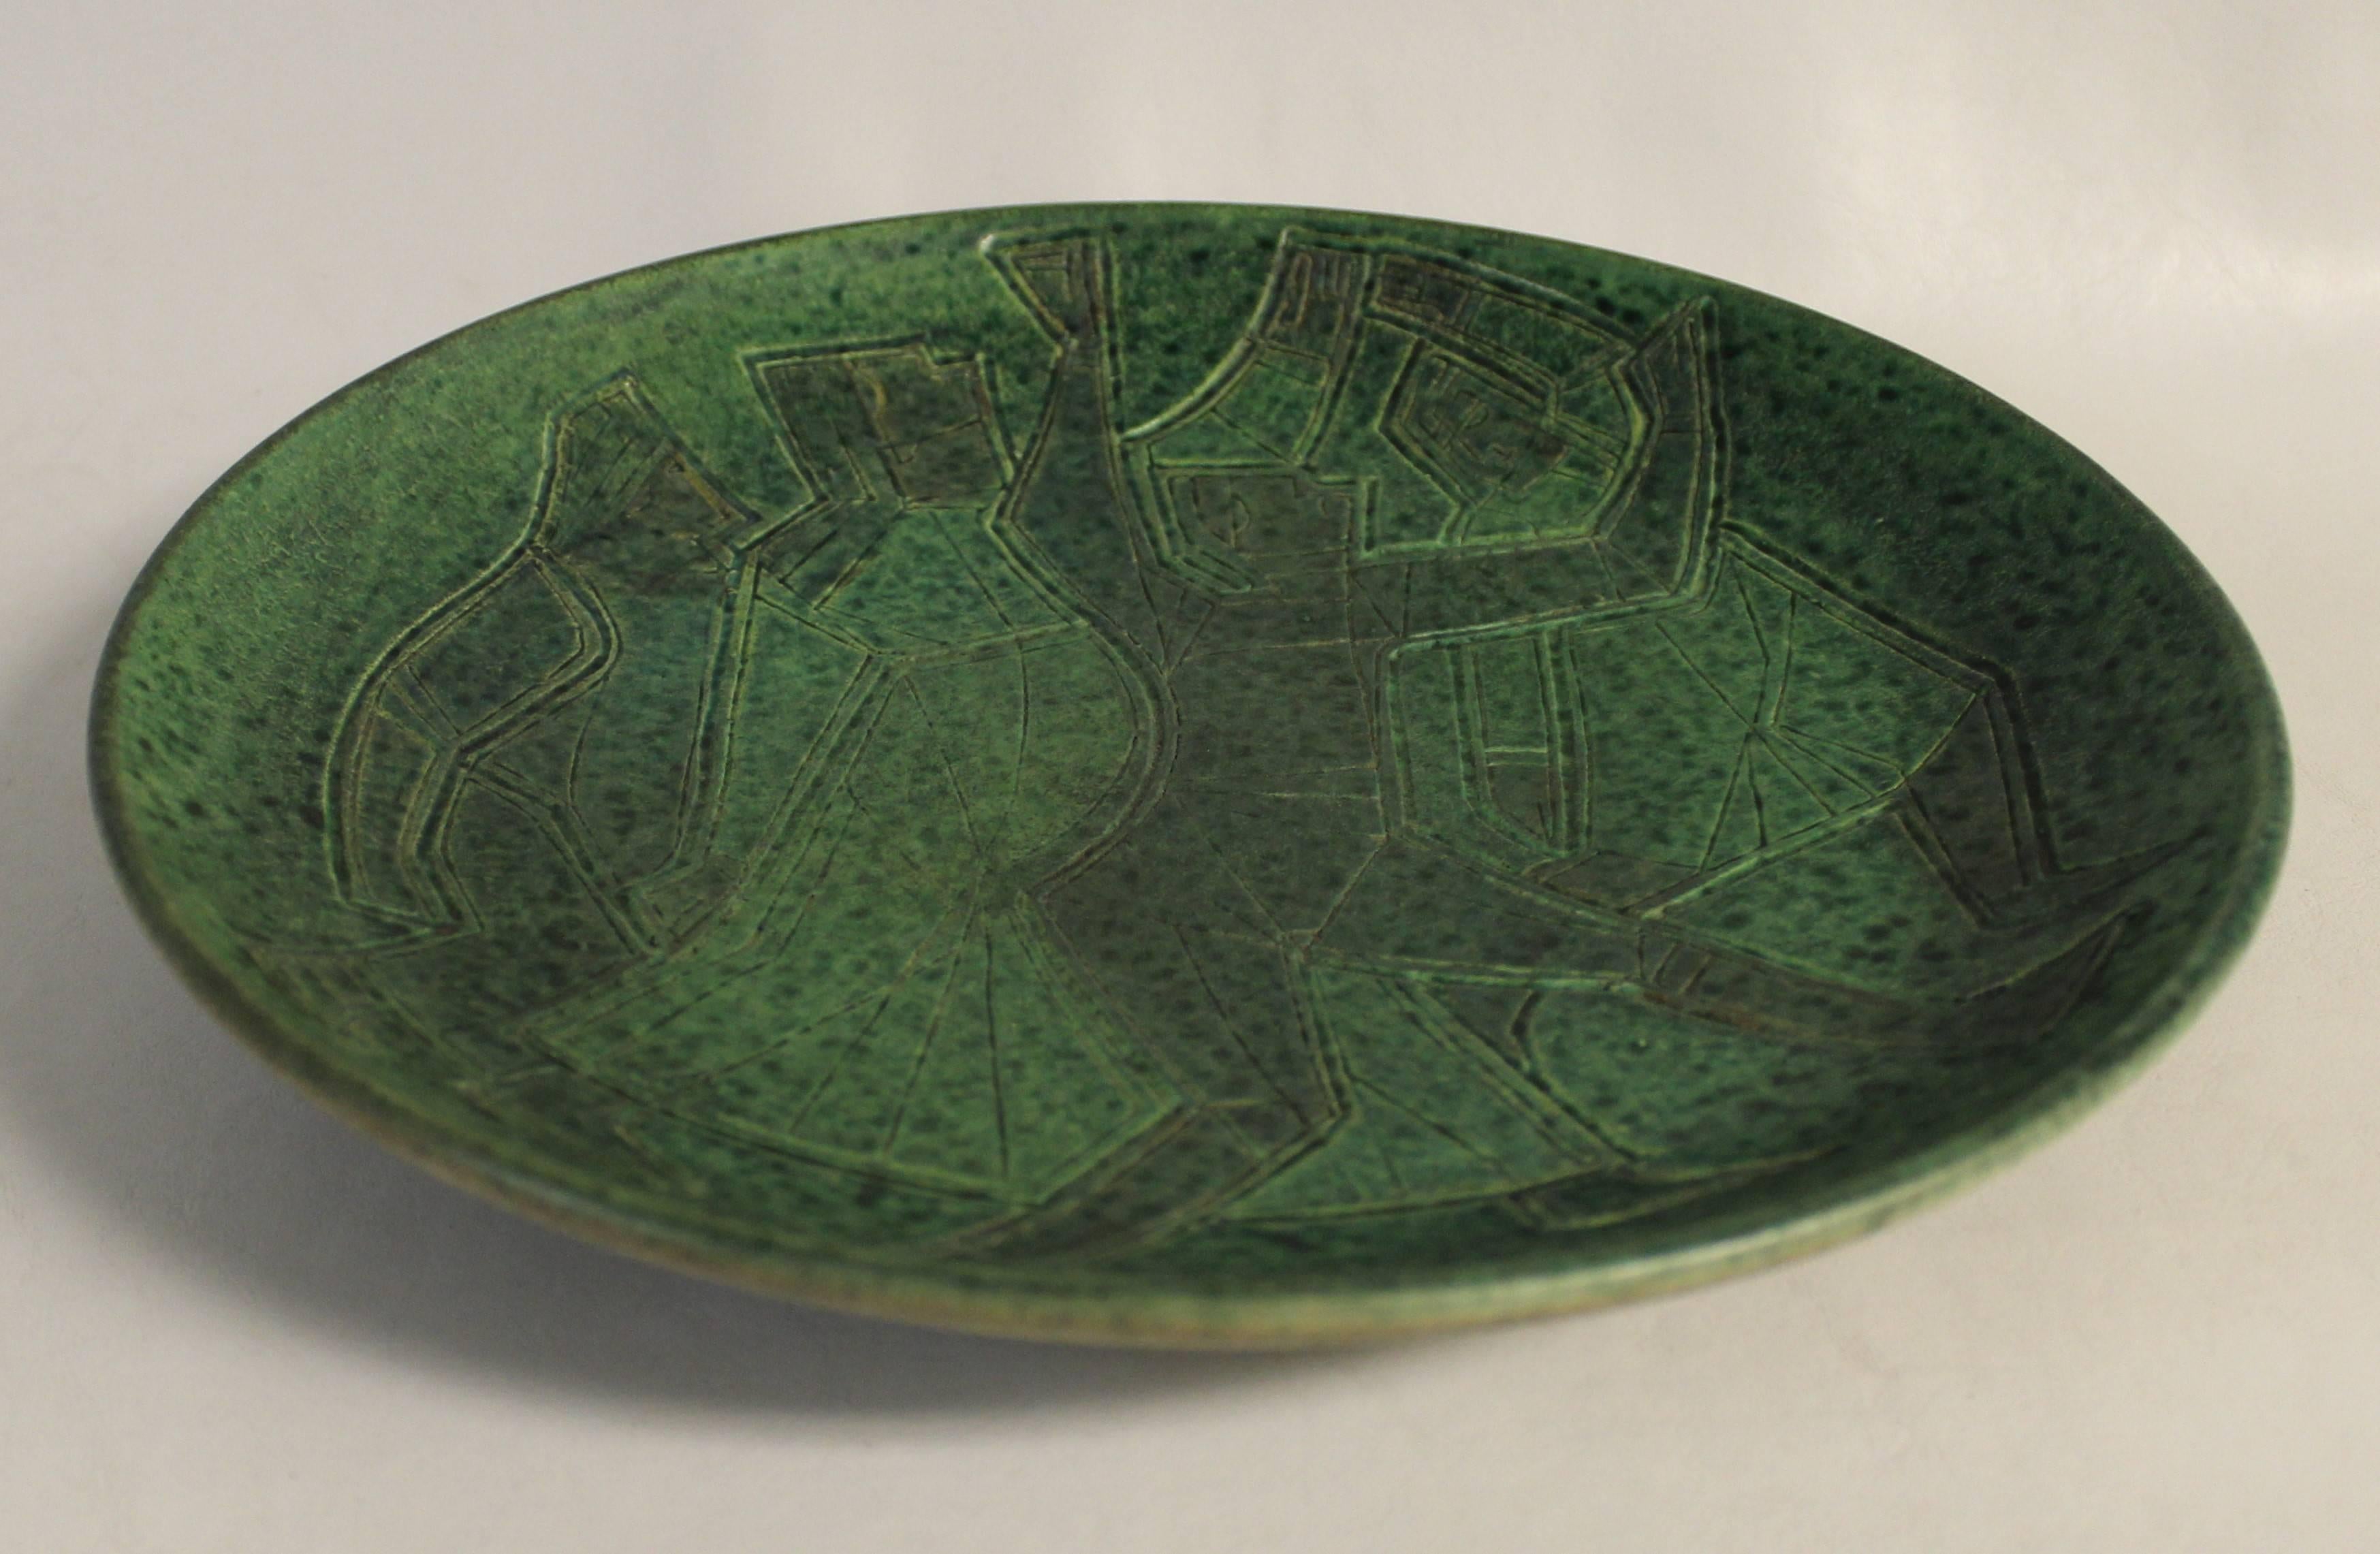 Studio Pottery Mid-Century Modern plate by Theo and Susan Harlander of Brooklin Pottery, Brooklin, Ontario. This bowl was designed with a whimsical cubist flare with incized figures and a mottled green glaze finish. 

German immigrants Theo and